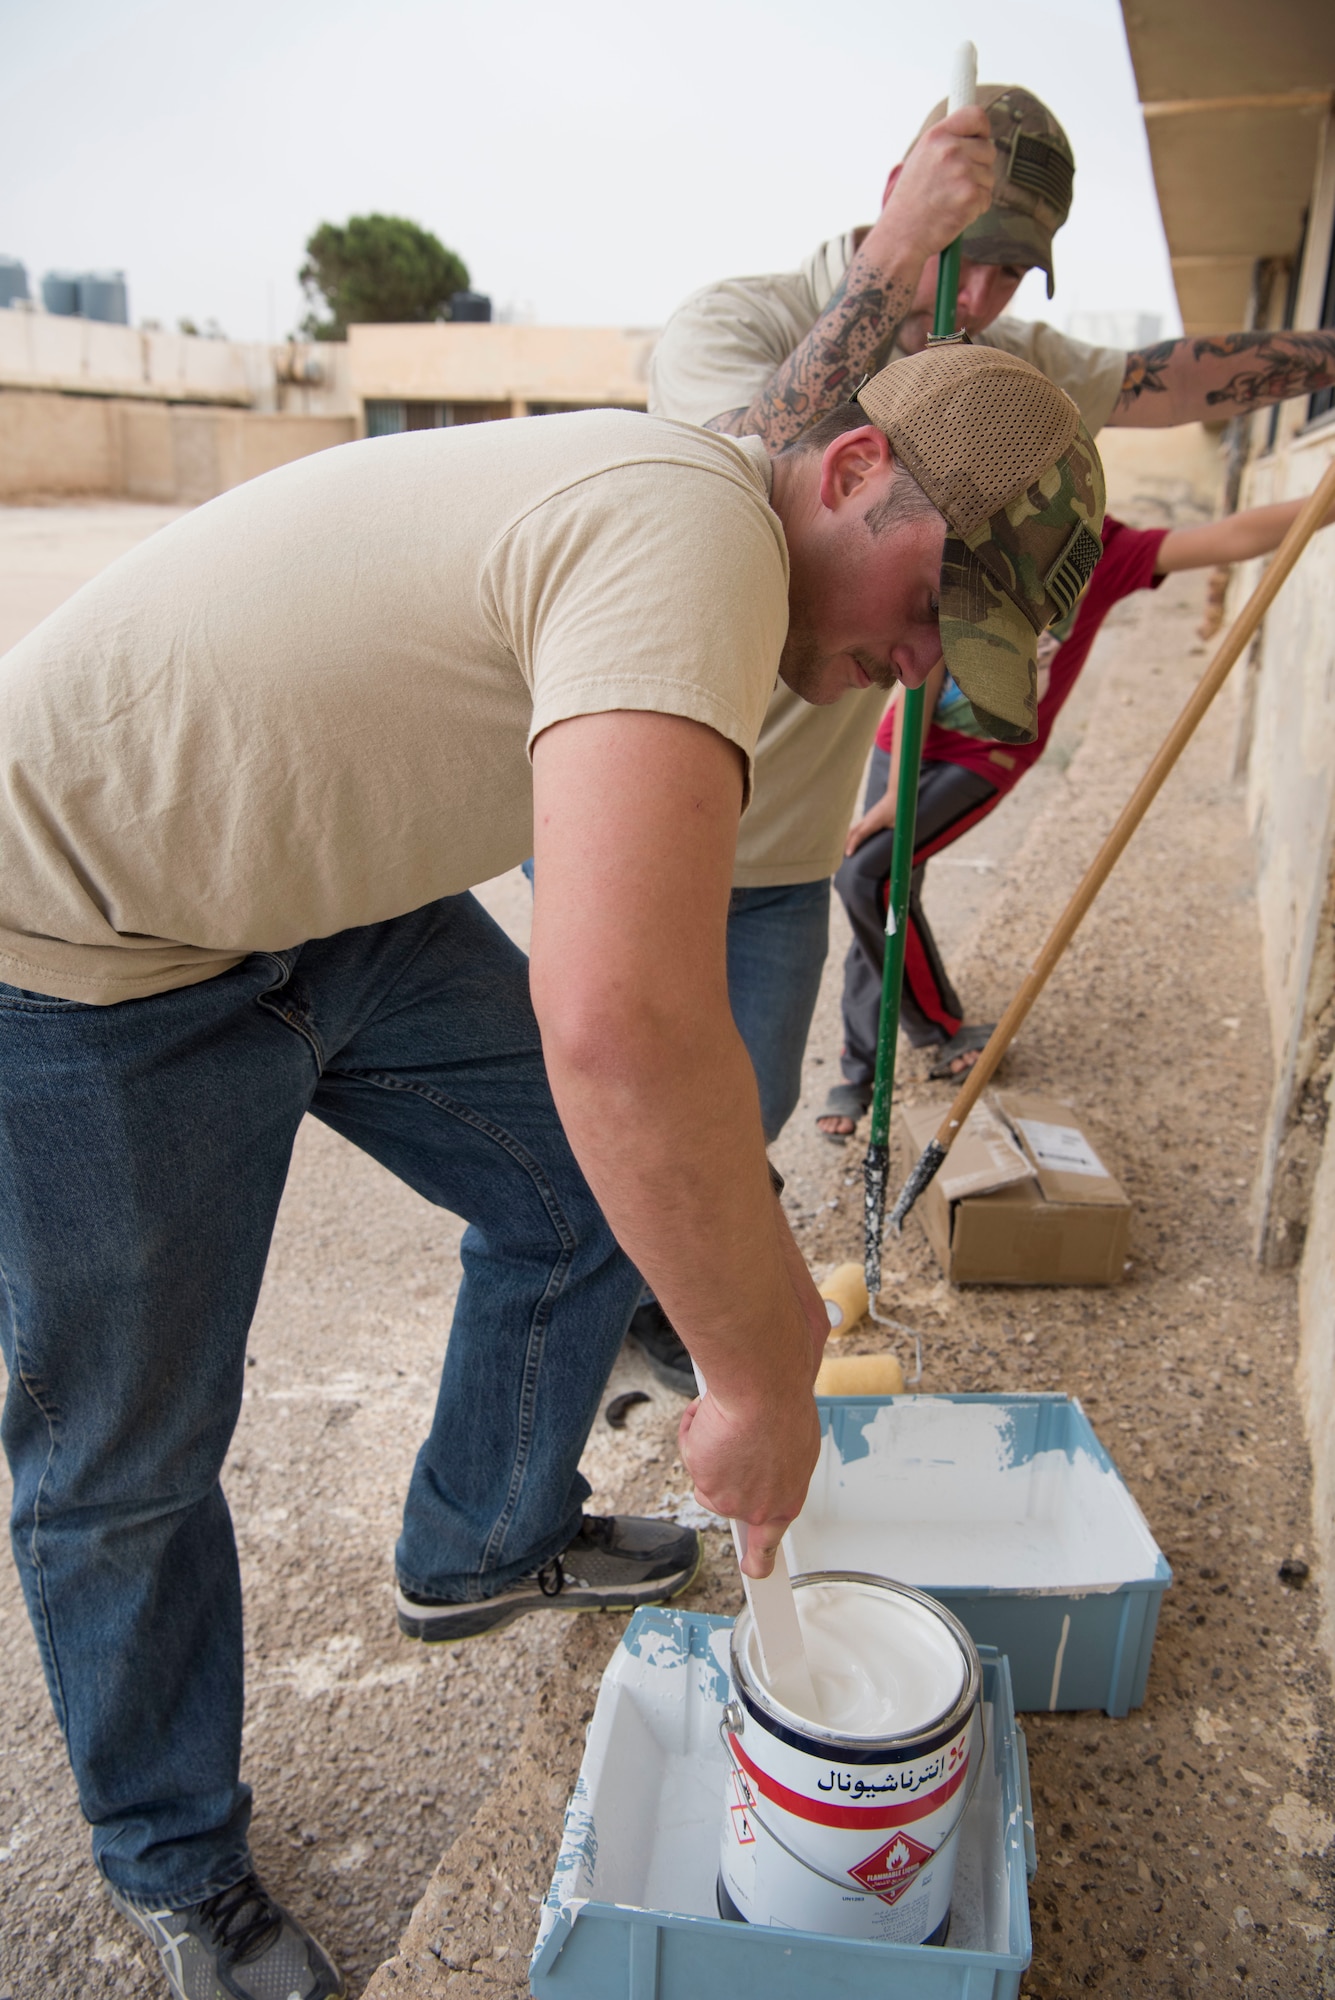 332nd Expeditionary Medical Group Airmen mix paint for a soccer field they are renovating for local kids at an undisclosed location in Southwest Asia May 26, 2018.